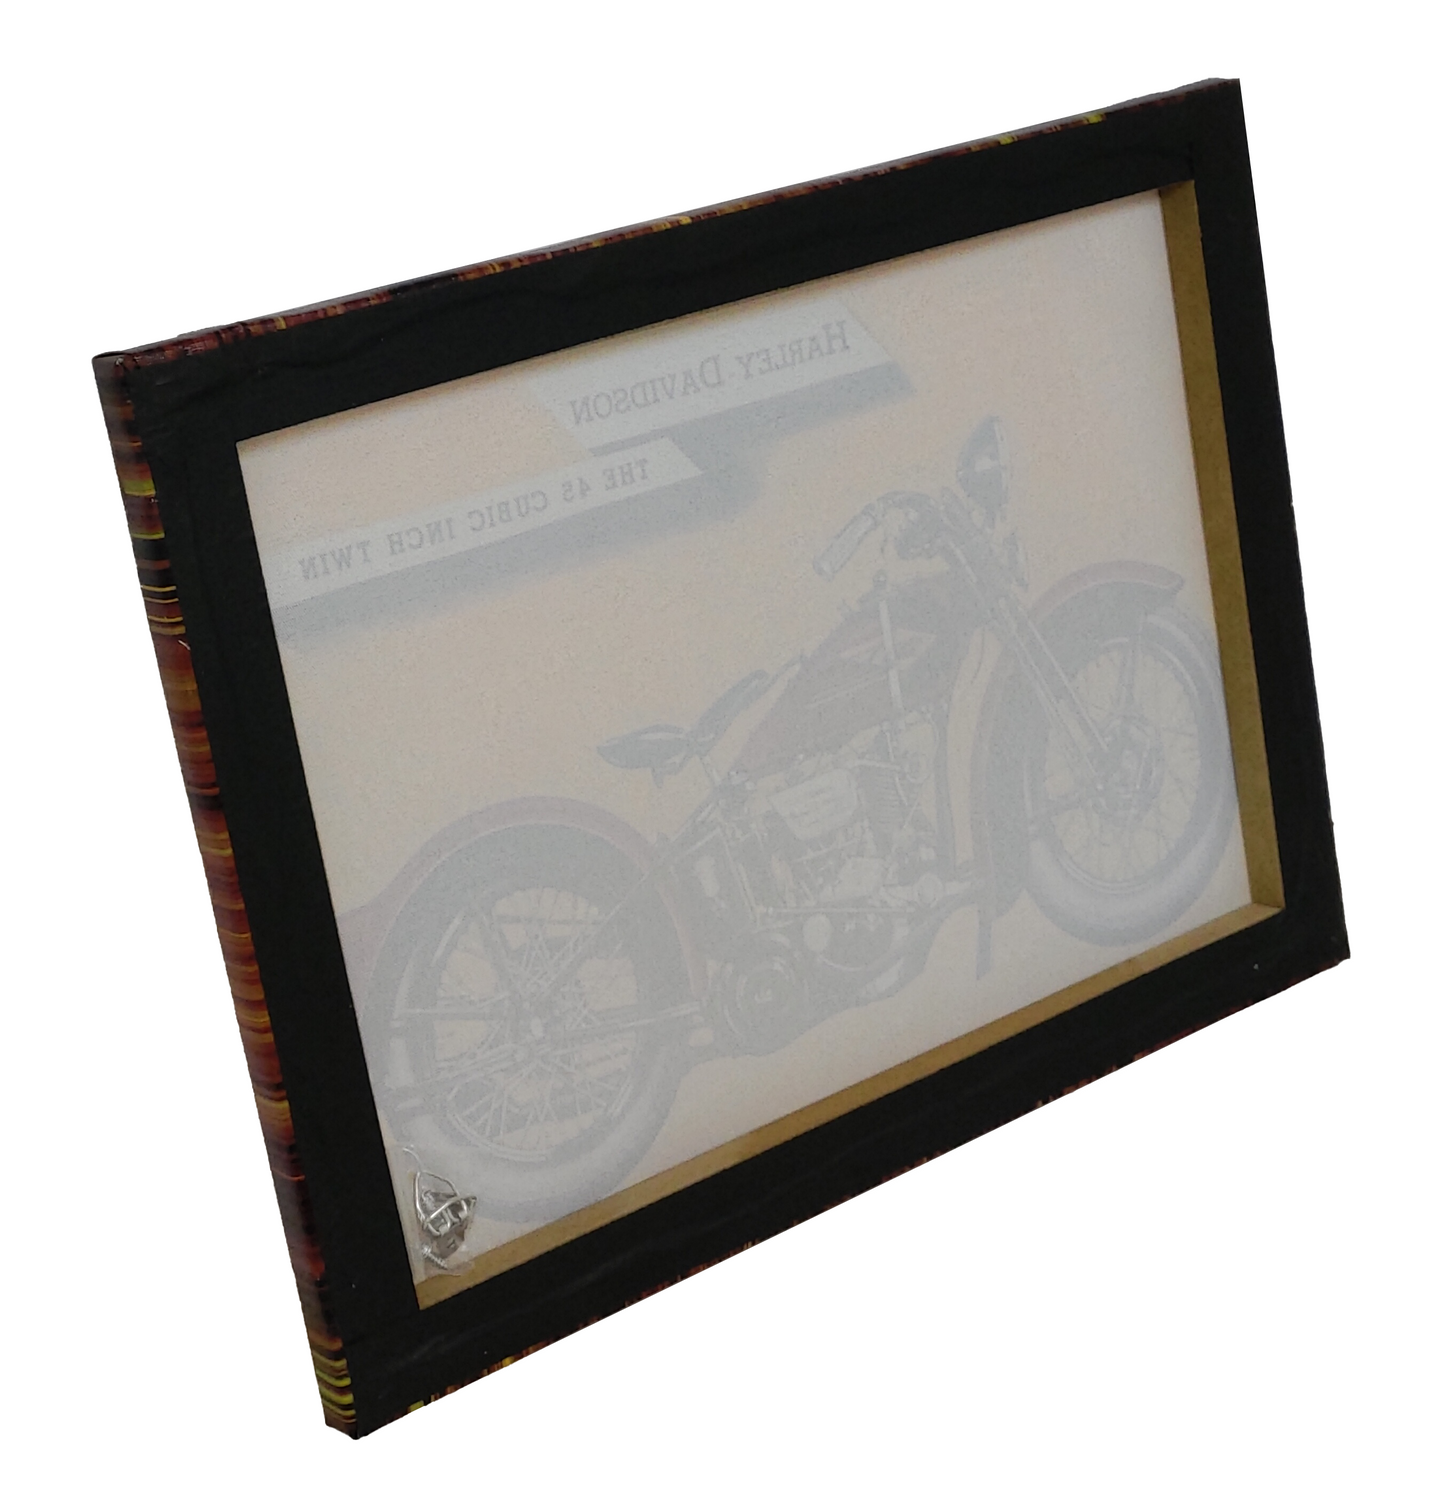 HARLEY-DAVIDSON THE 45 CUBIC INCH TWIN CANVAS PRINT